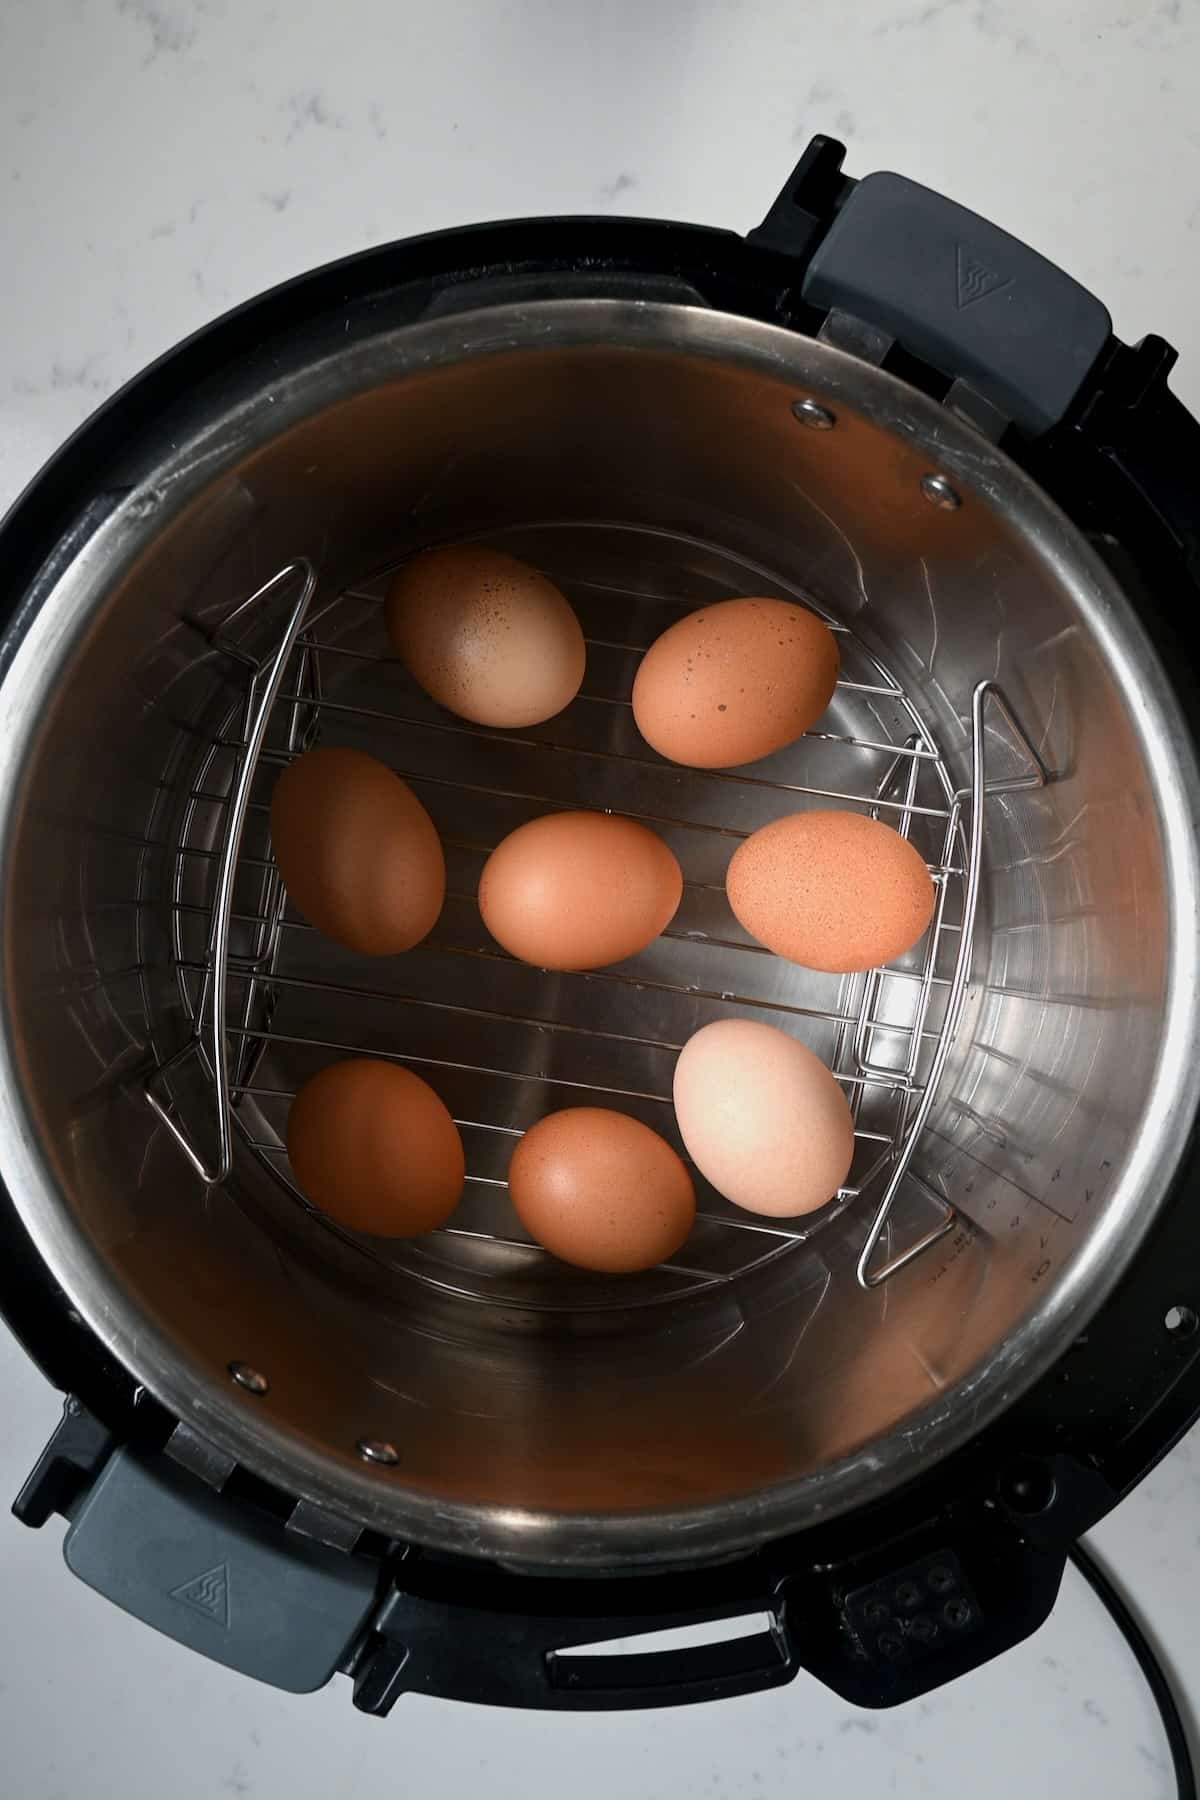 Eggs in an instant pot